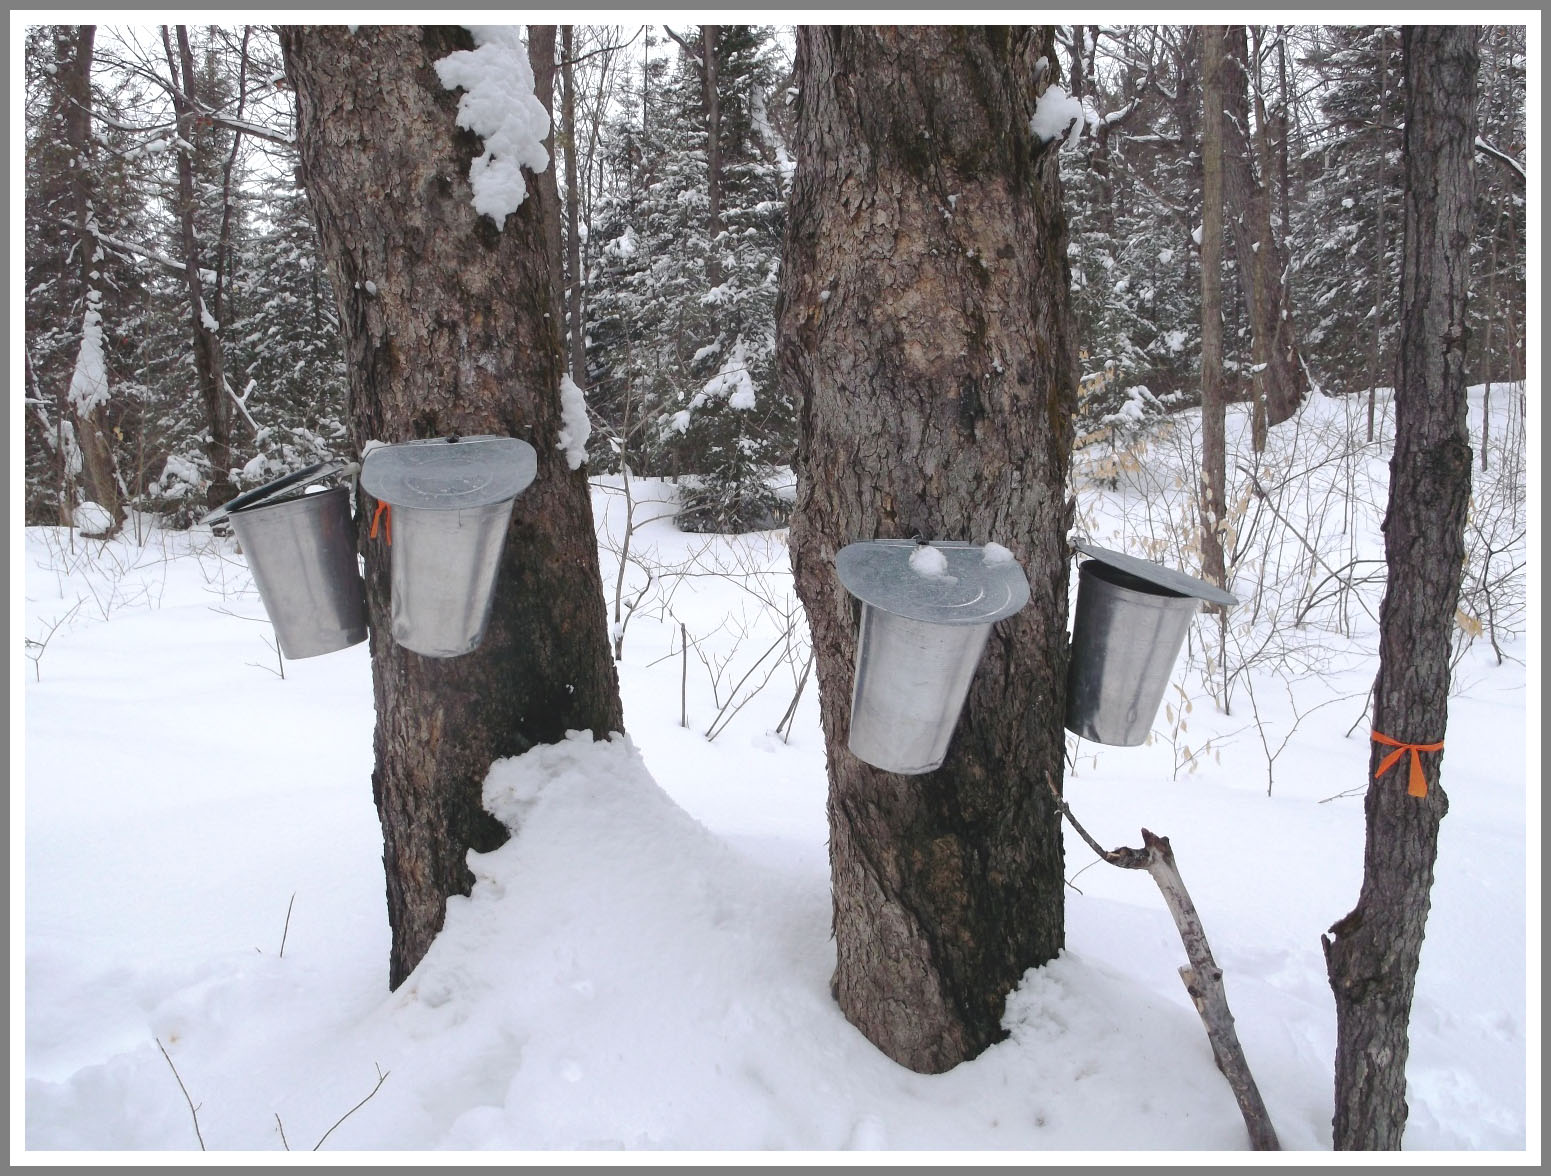 Maple syrup time is here - for Spring 2013 page